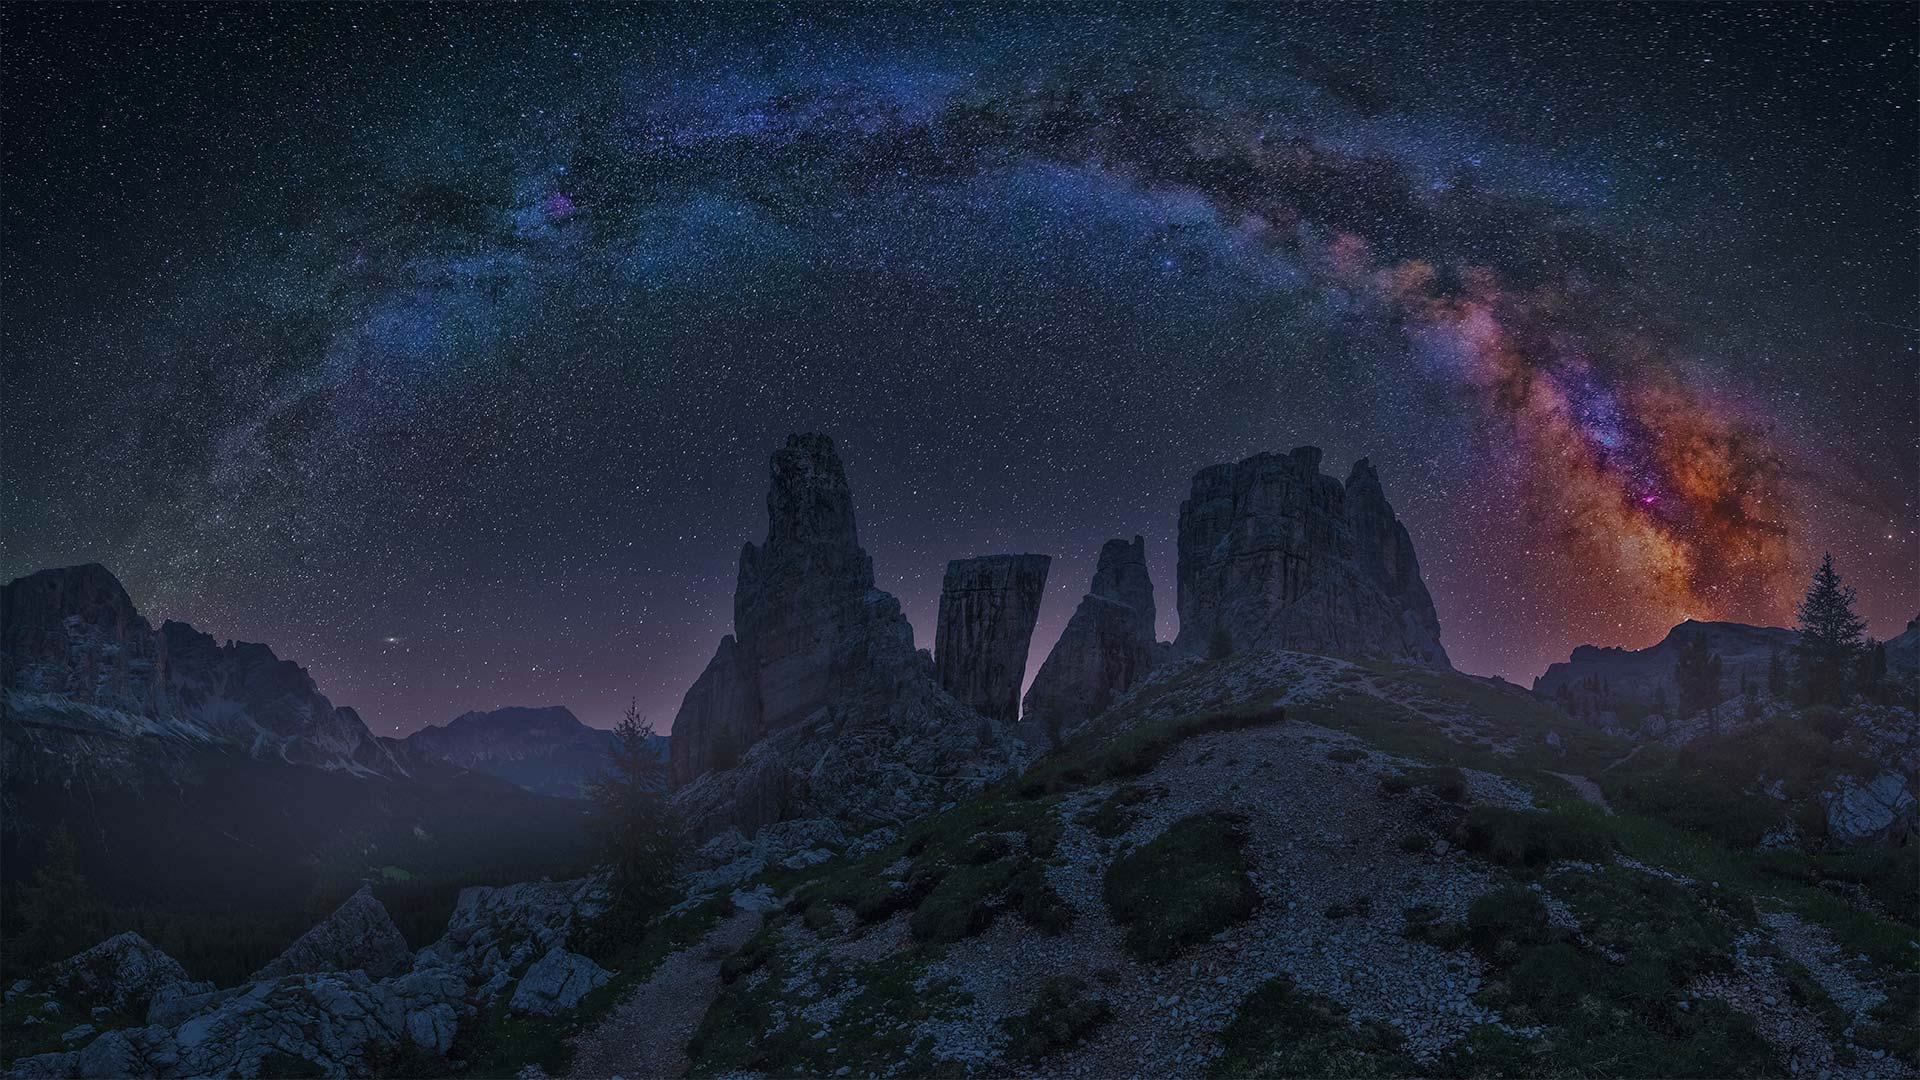 Dolomite Mountains at night with the Milky Way, Italy - Carlos Fernandez/Getty Images)